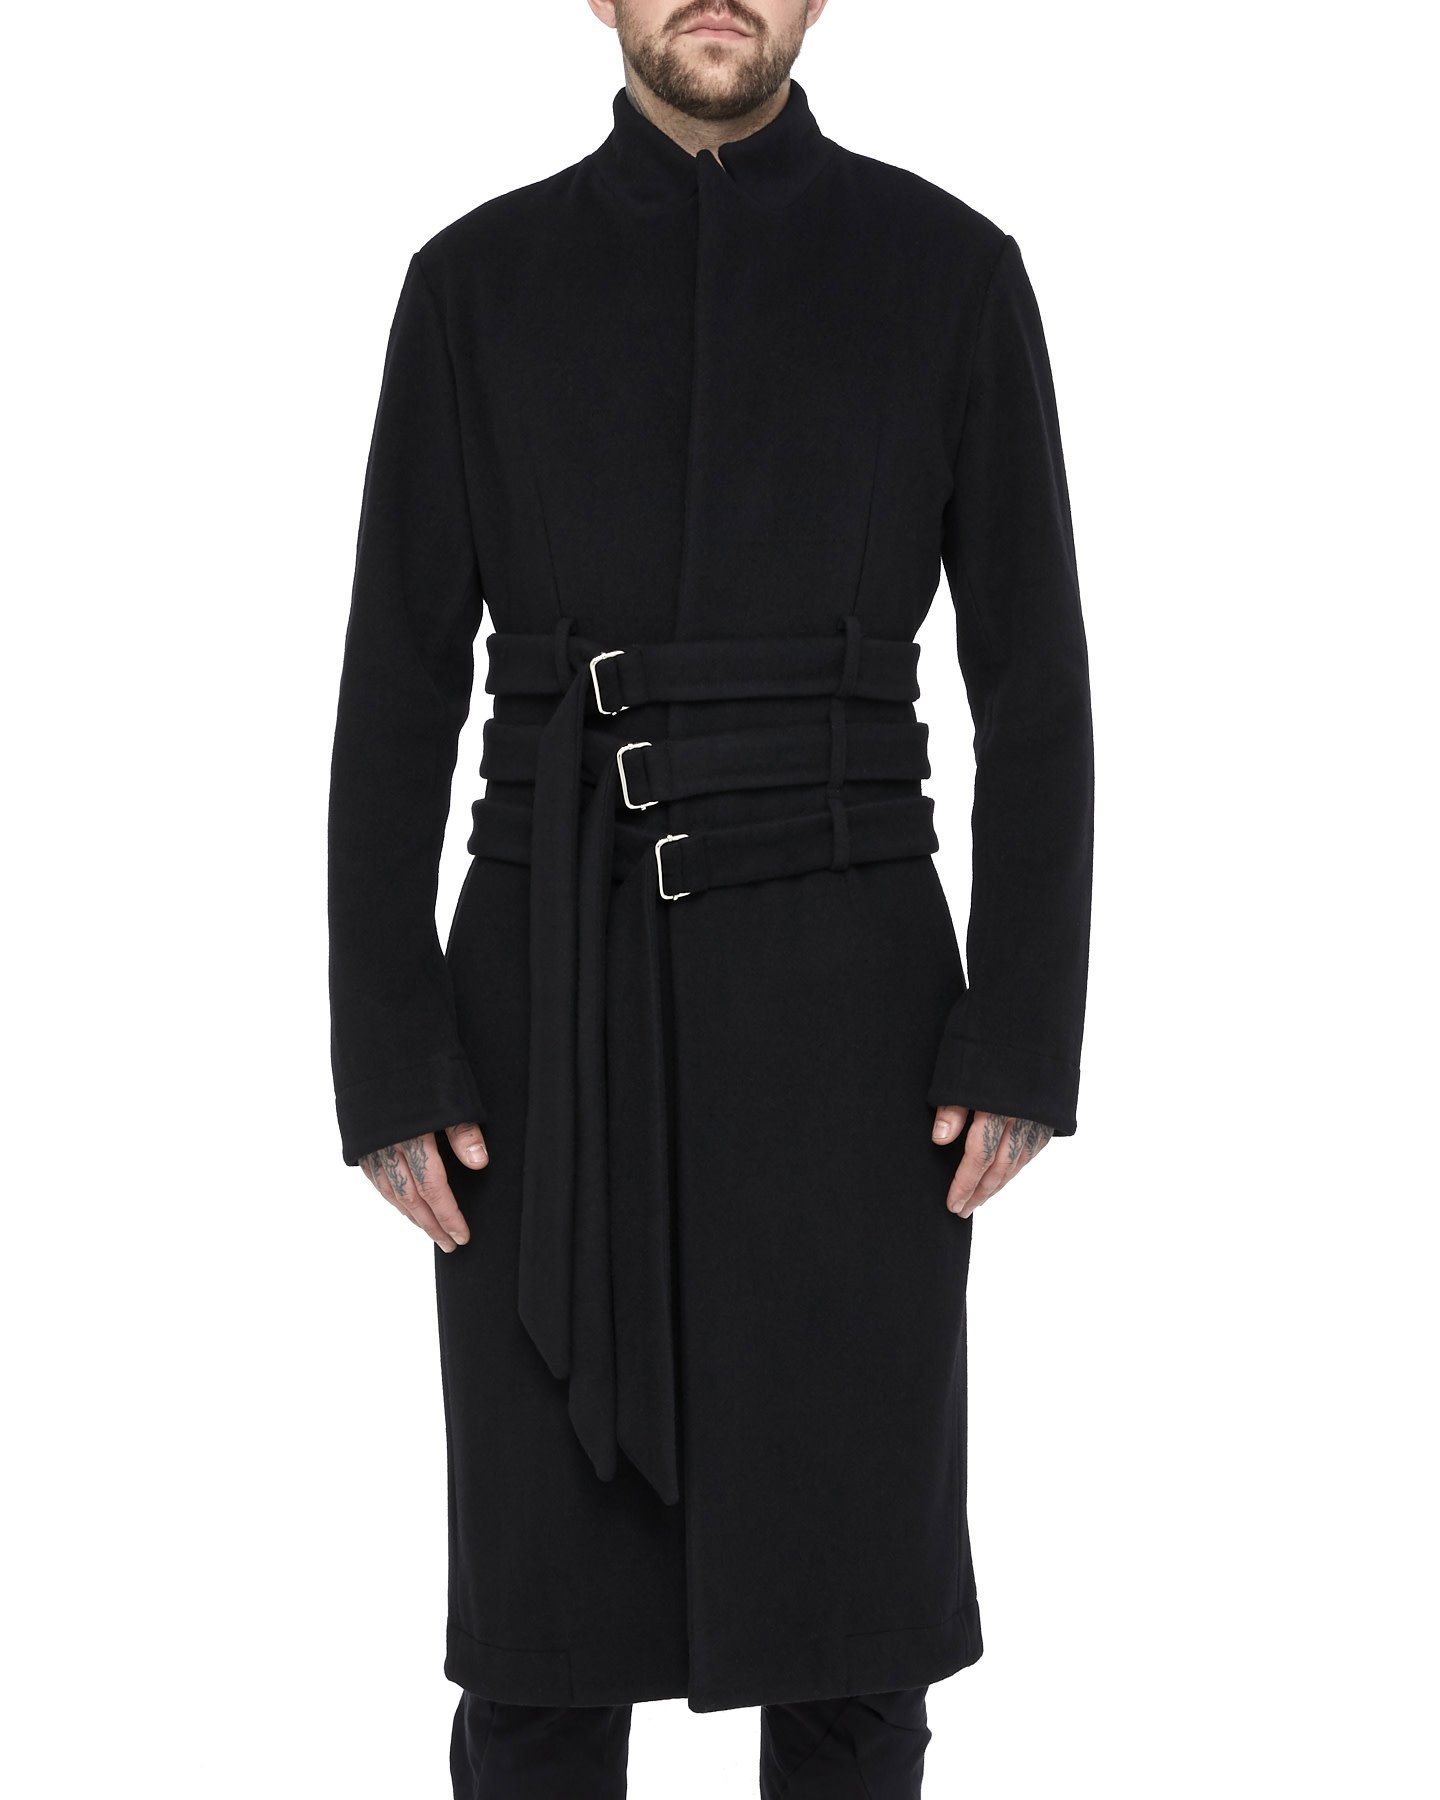 WOOL CASHMERE COAT WITH BELTS